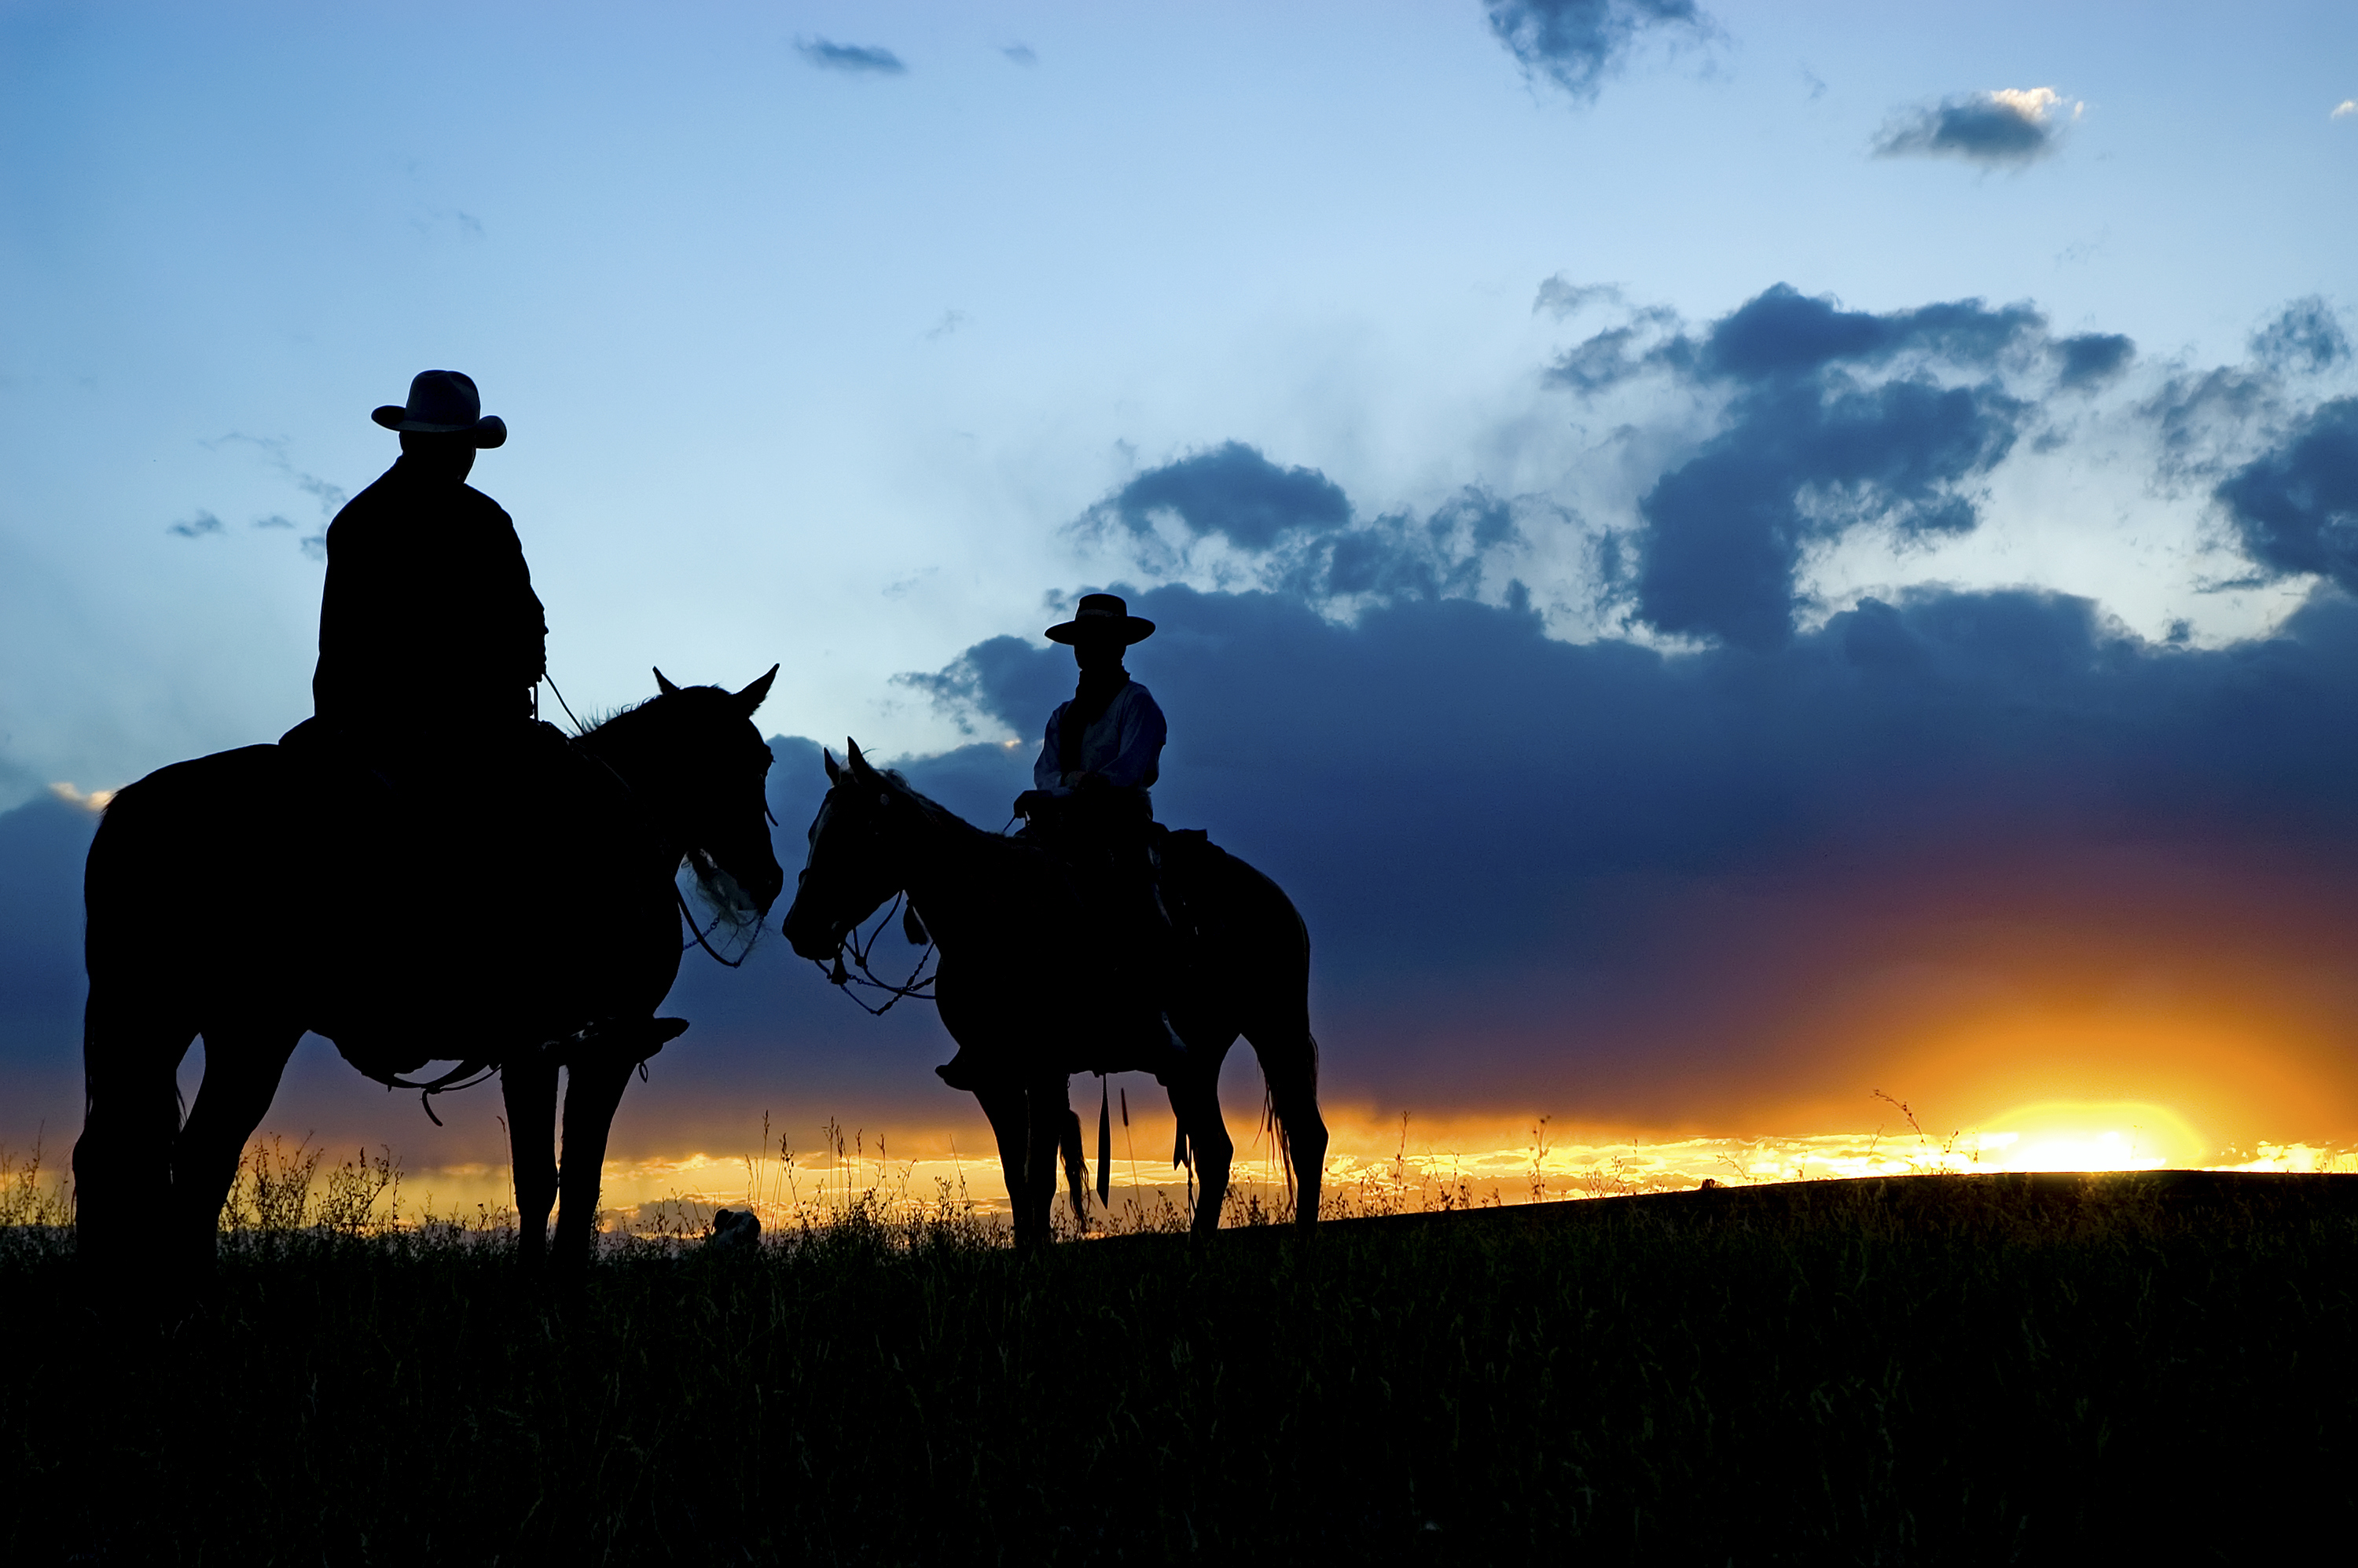 Cowboy silhouette (see others in my portfolio/lghtbox)